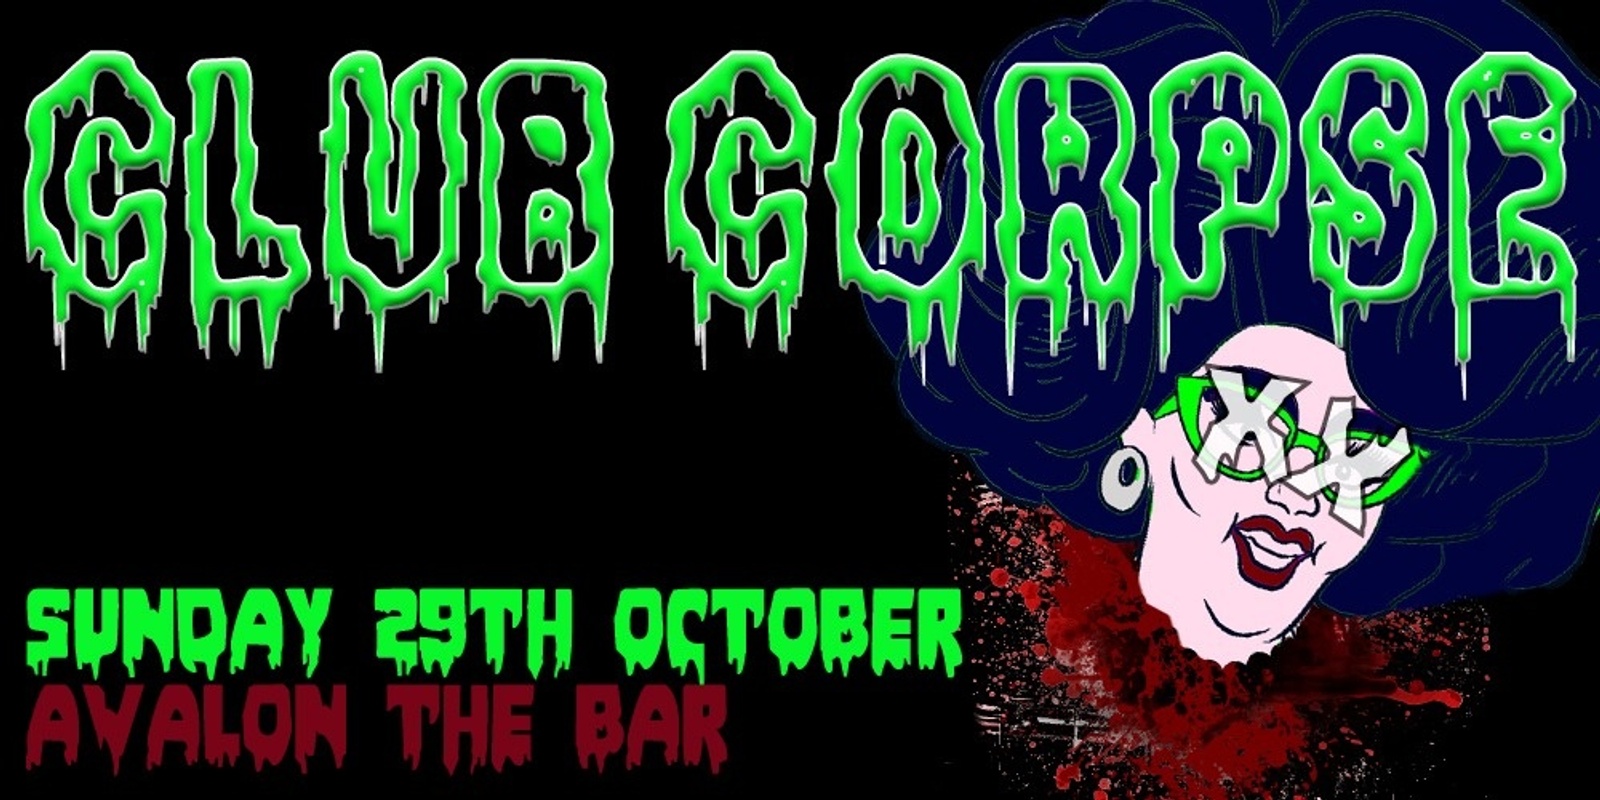 Banner image for Club Corpse